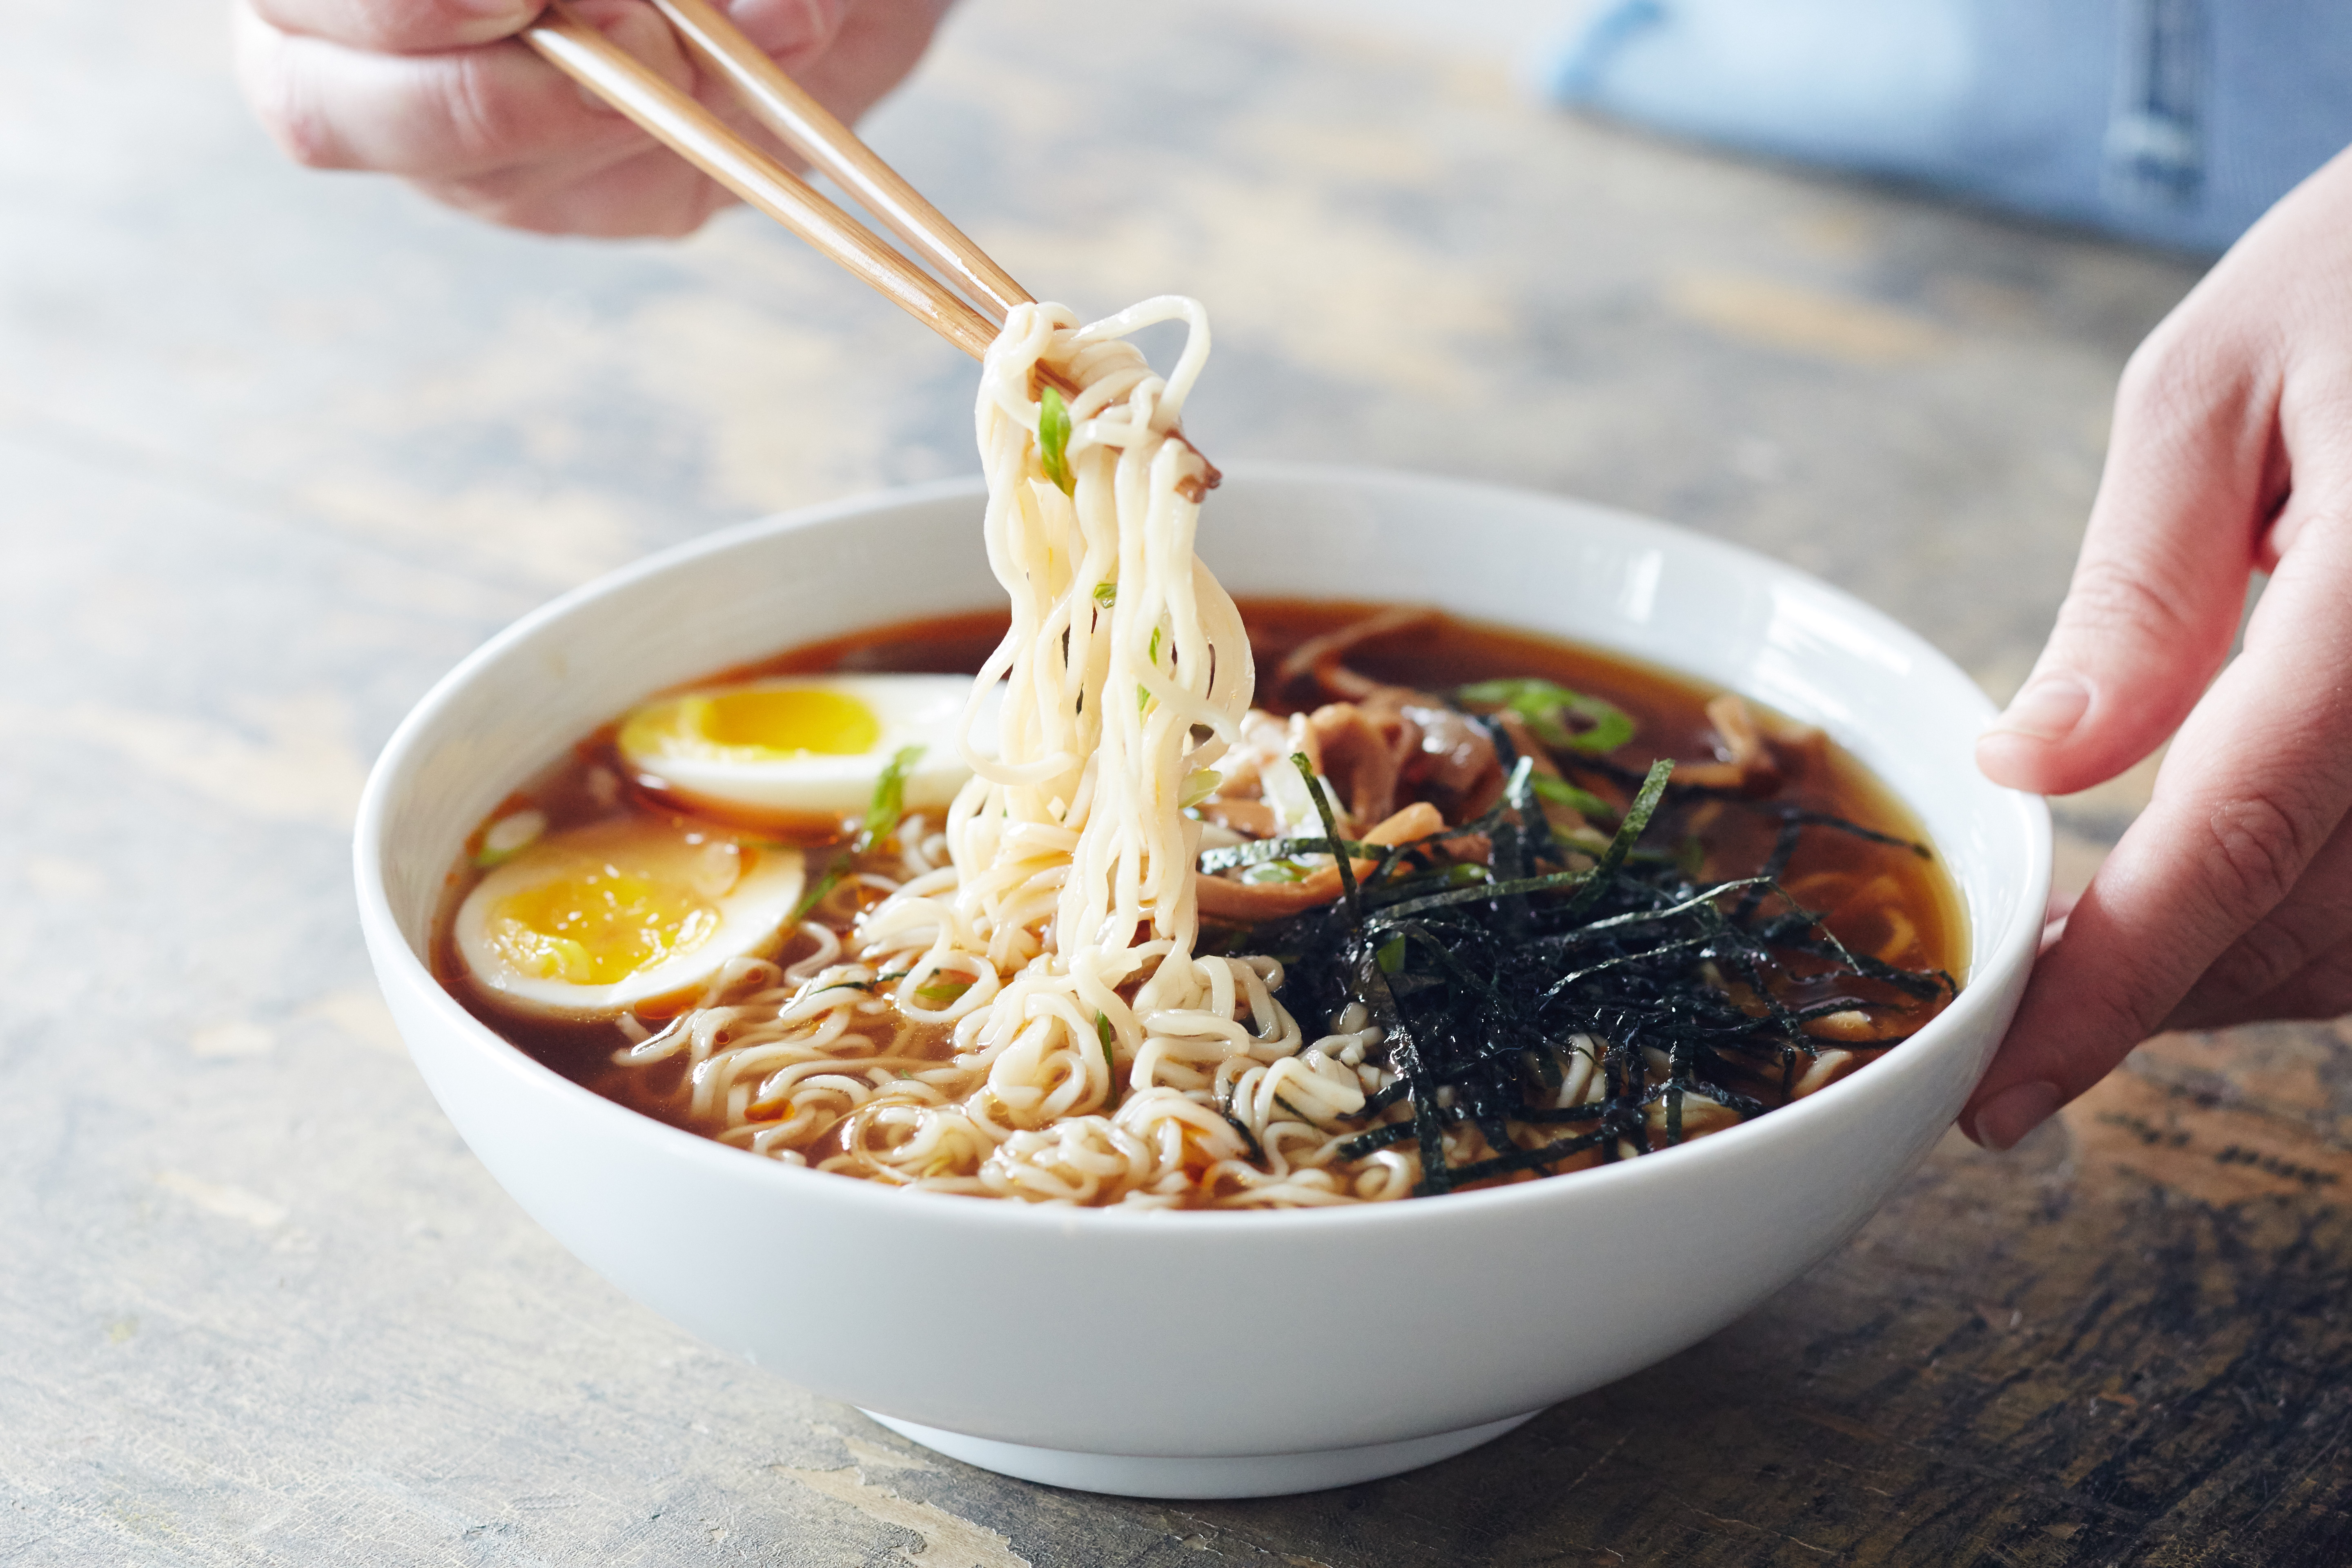 How To Make Really Good Restaurant-Style Ramen at Home